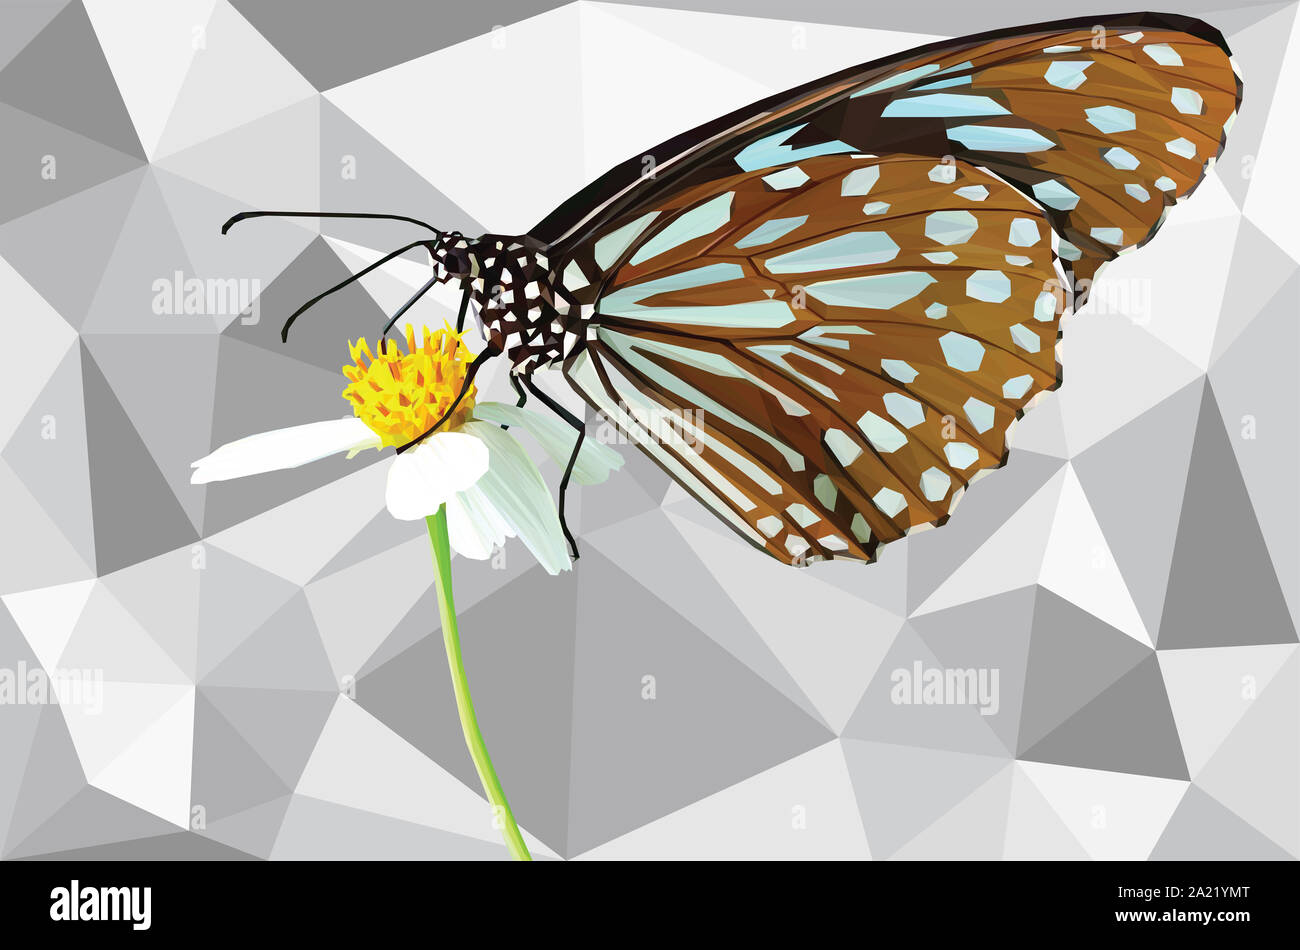 Low poly illustration of a butterfly on a daisy flower Stock Photo